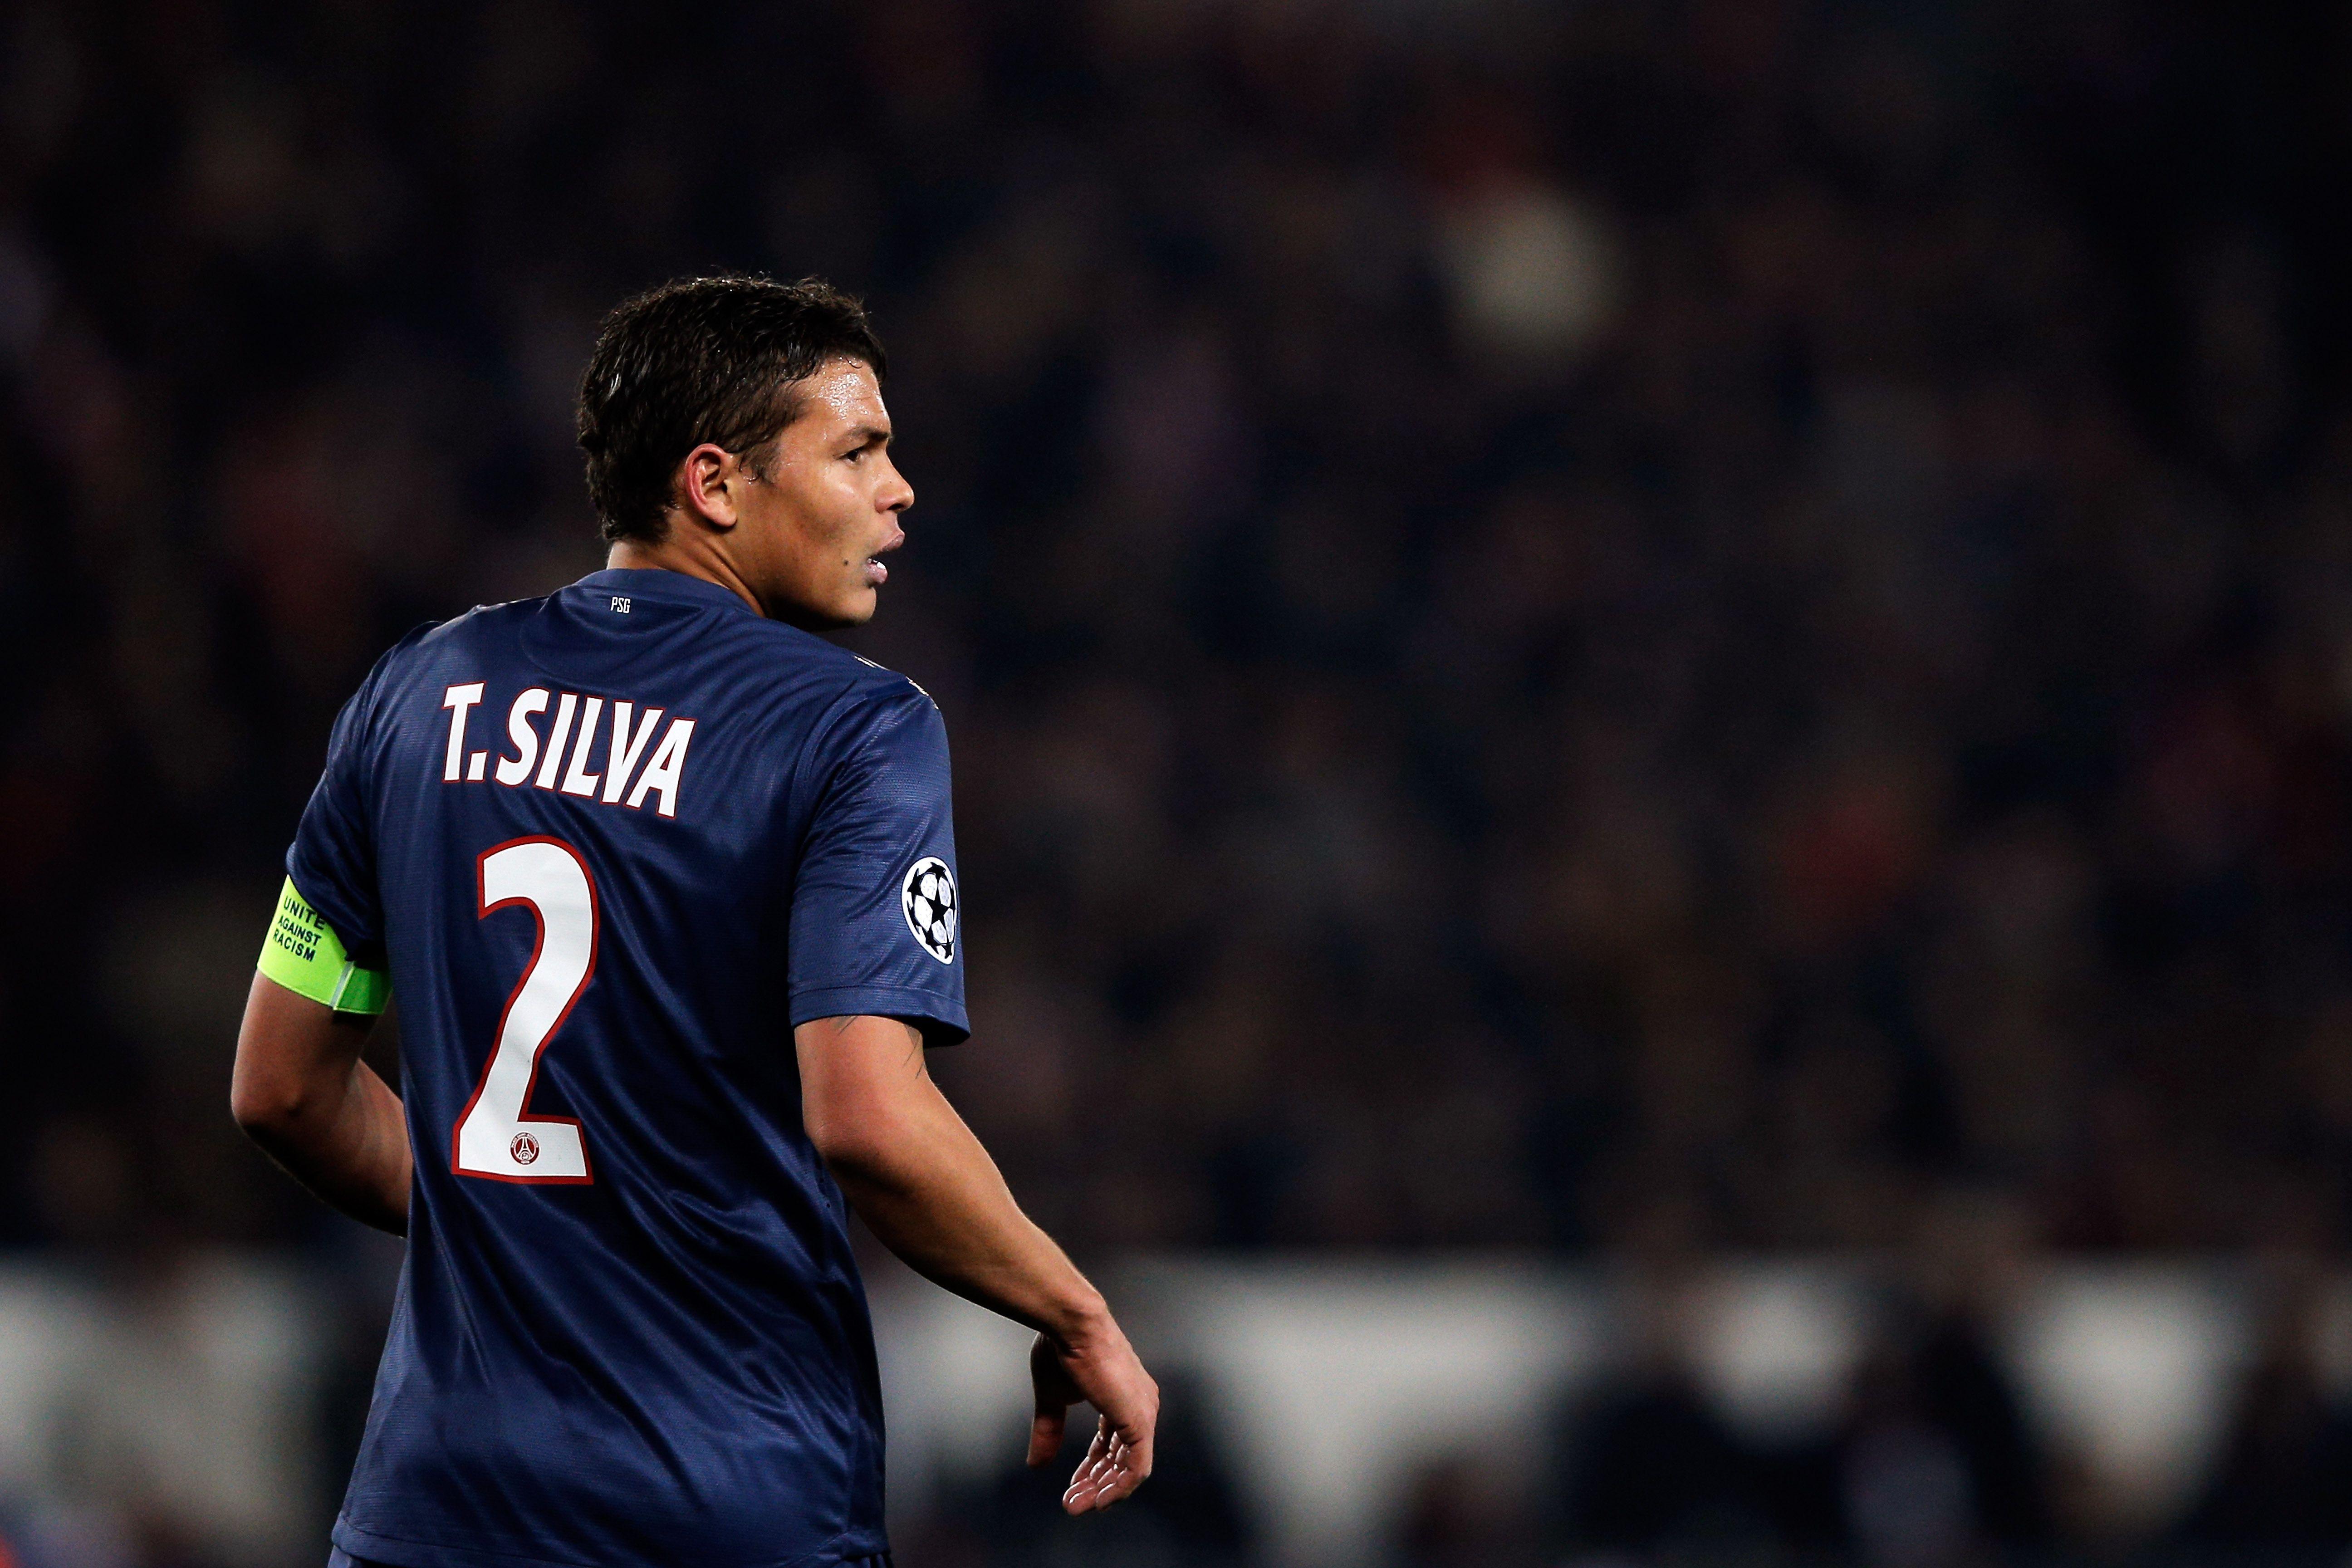 The player number 2 of PSG Thiago Silva wallpaper and image